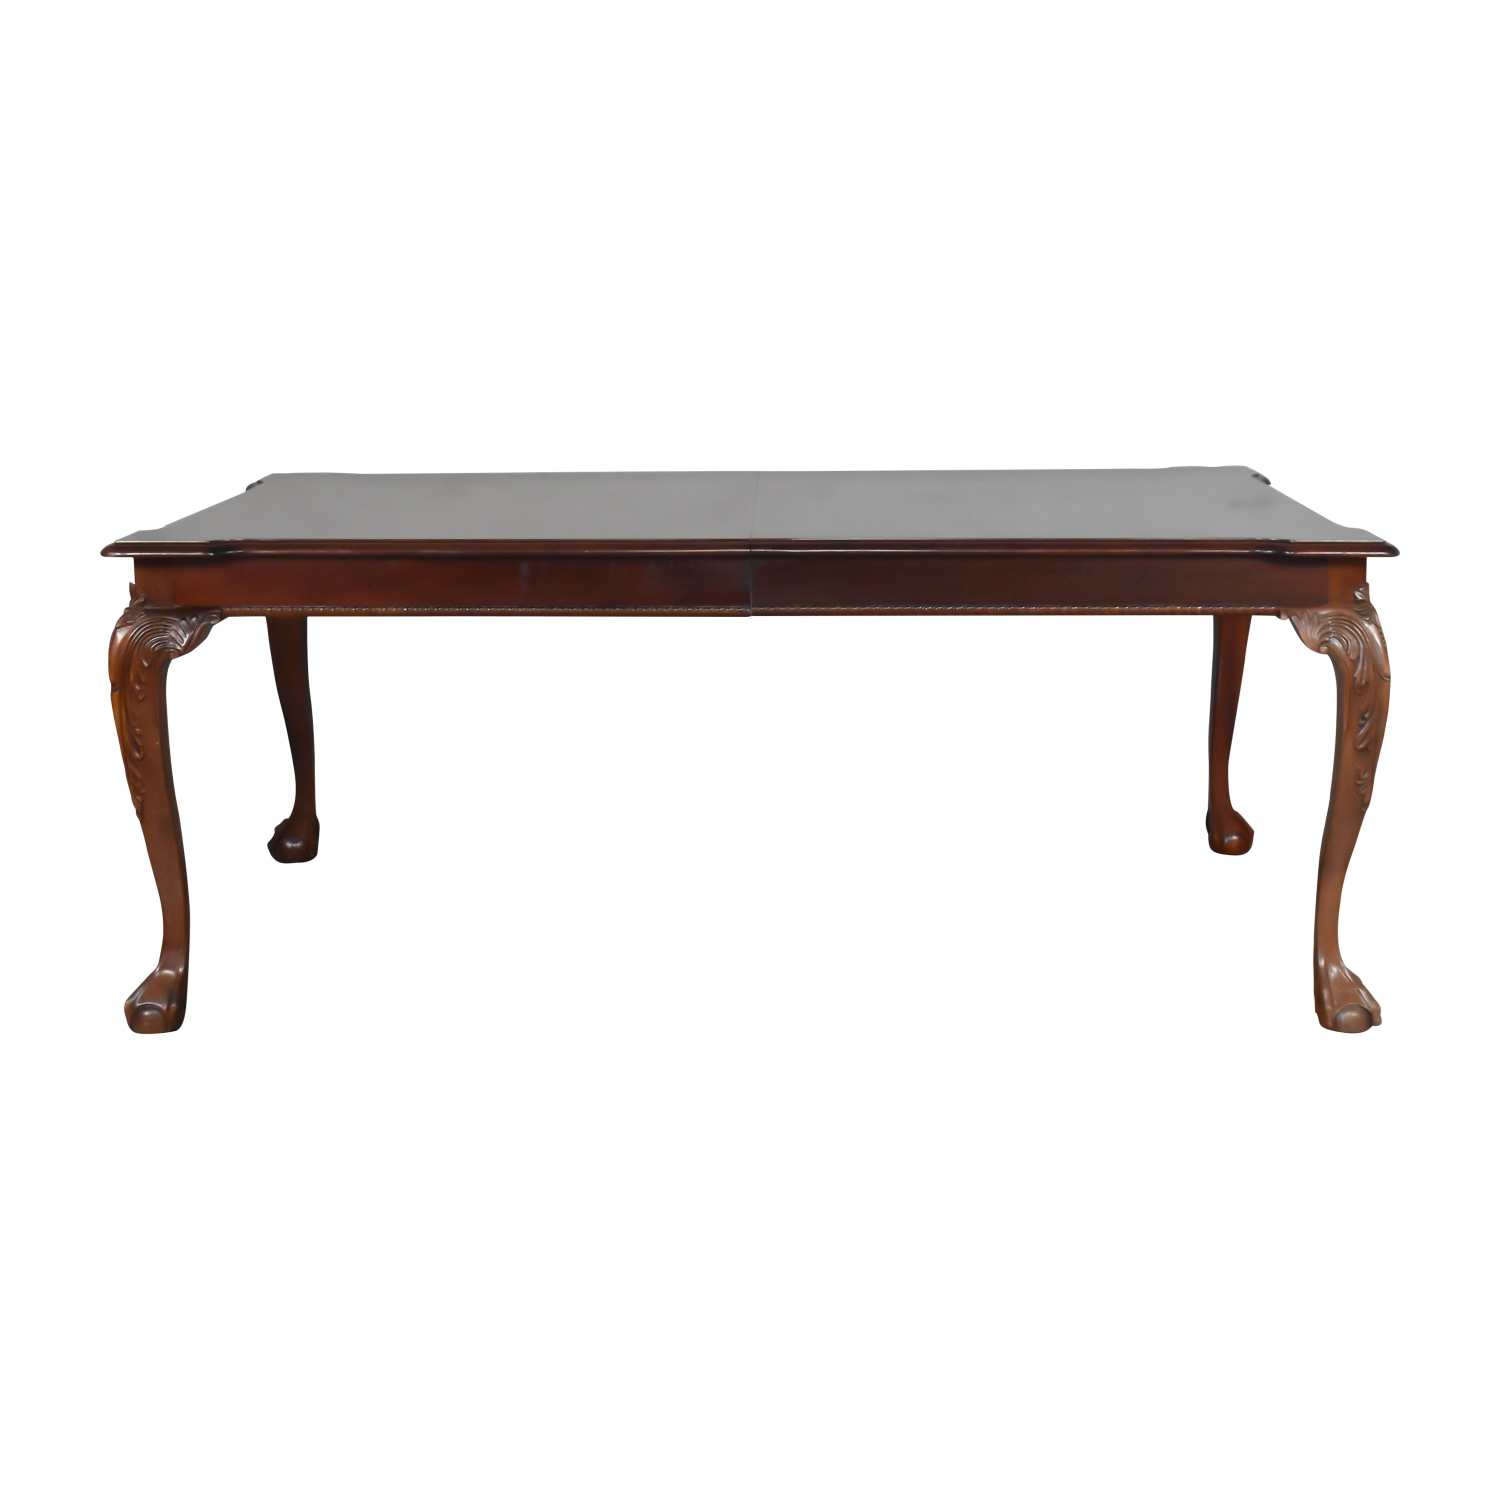 https://res.cloudinary.com/dkqtxtobb/image/upload/f_auto,q_auto:best,w_1500/product-assets/198061/stanley-furniture/tables/dinner-tables/buy-stanley-furniture-stoneleigh-collection-extension-dining-table.jpeg